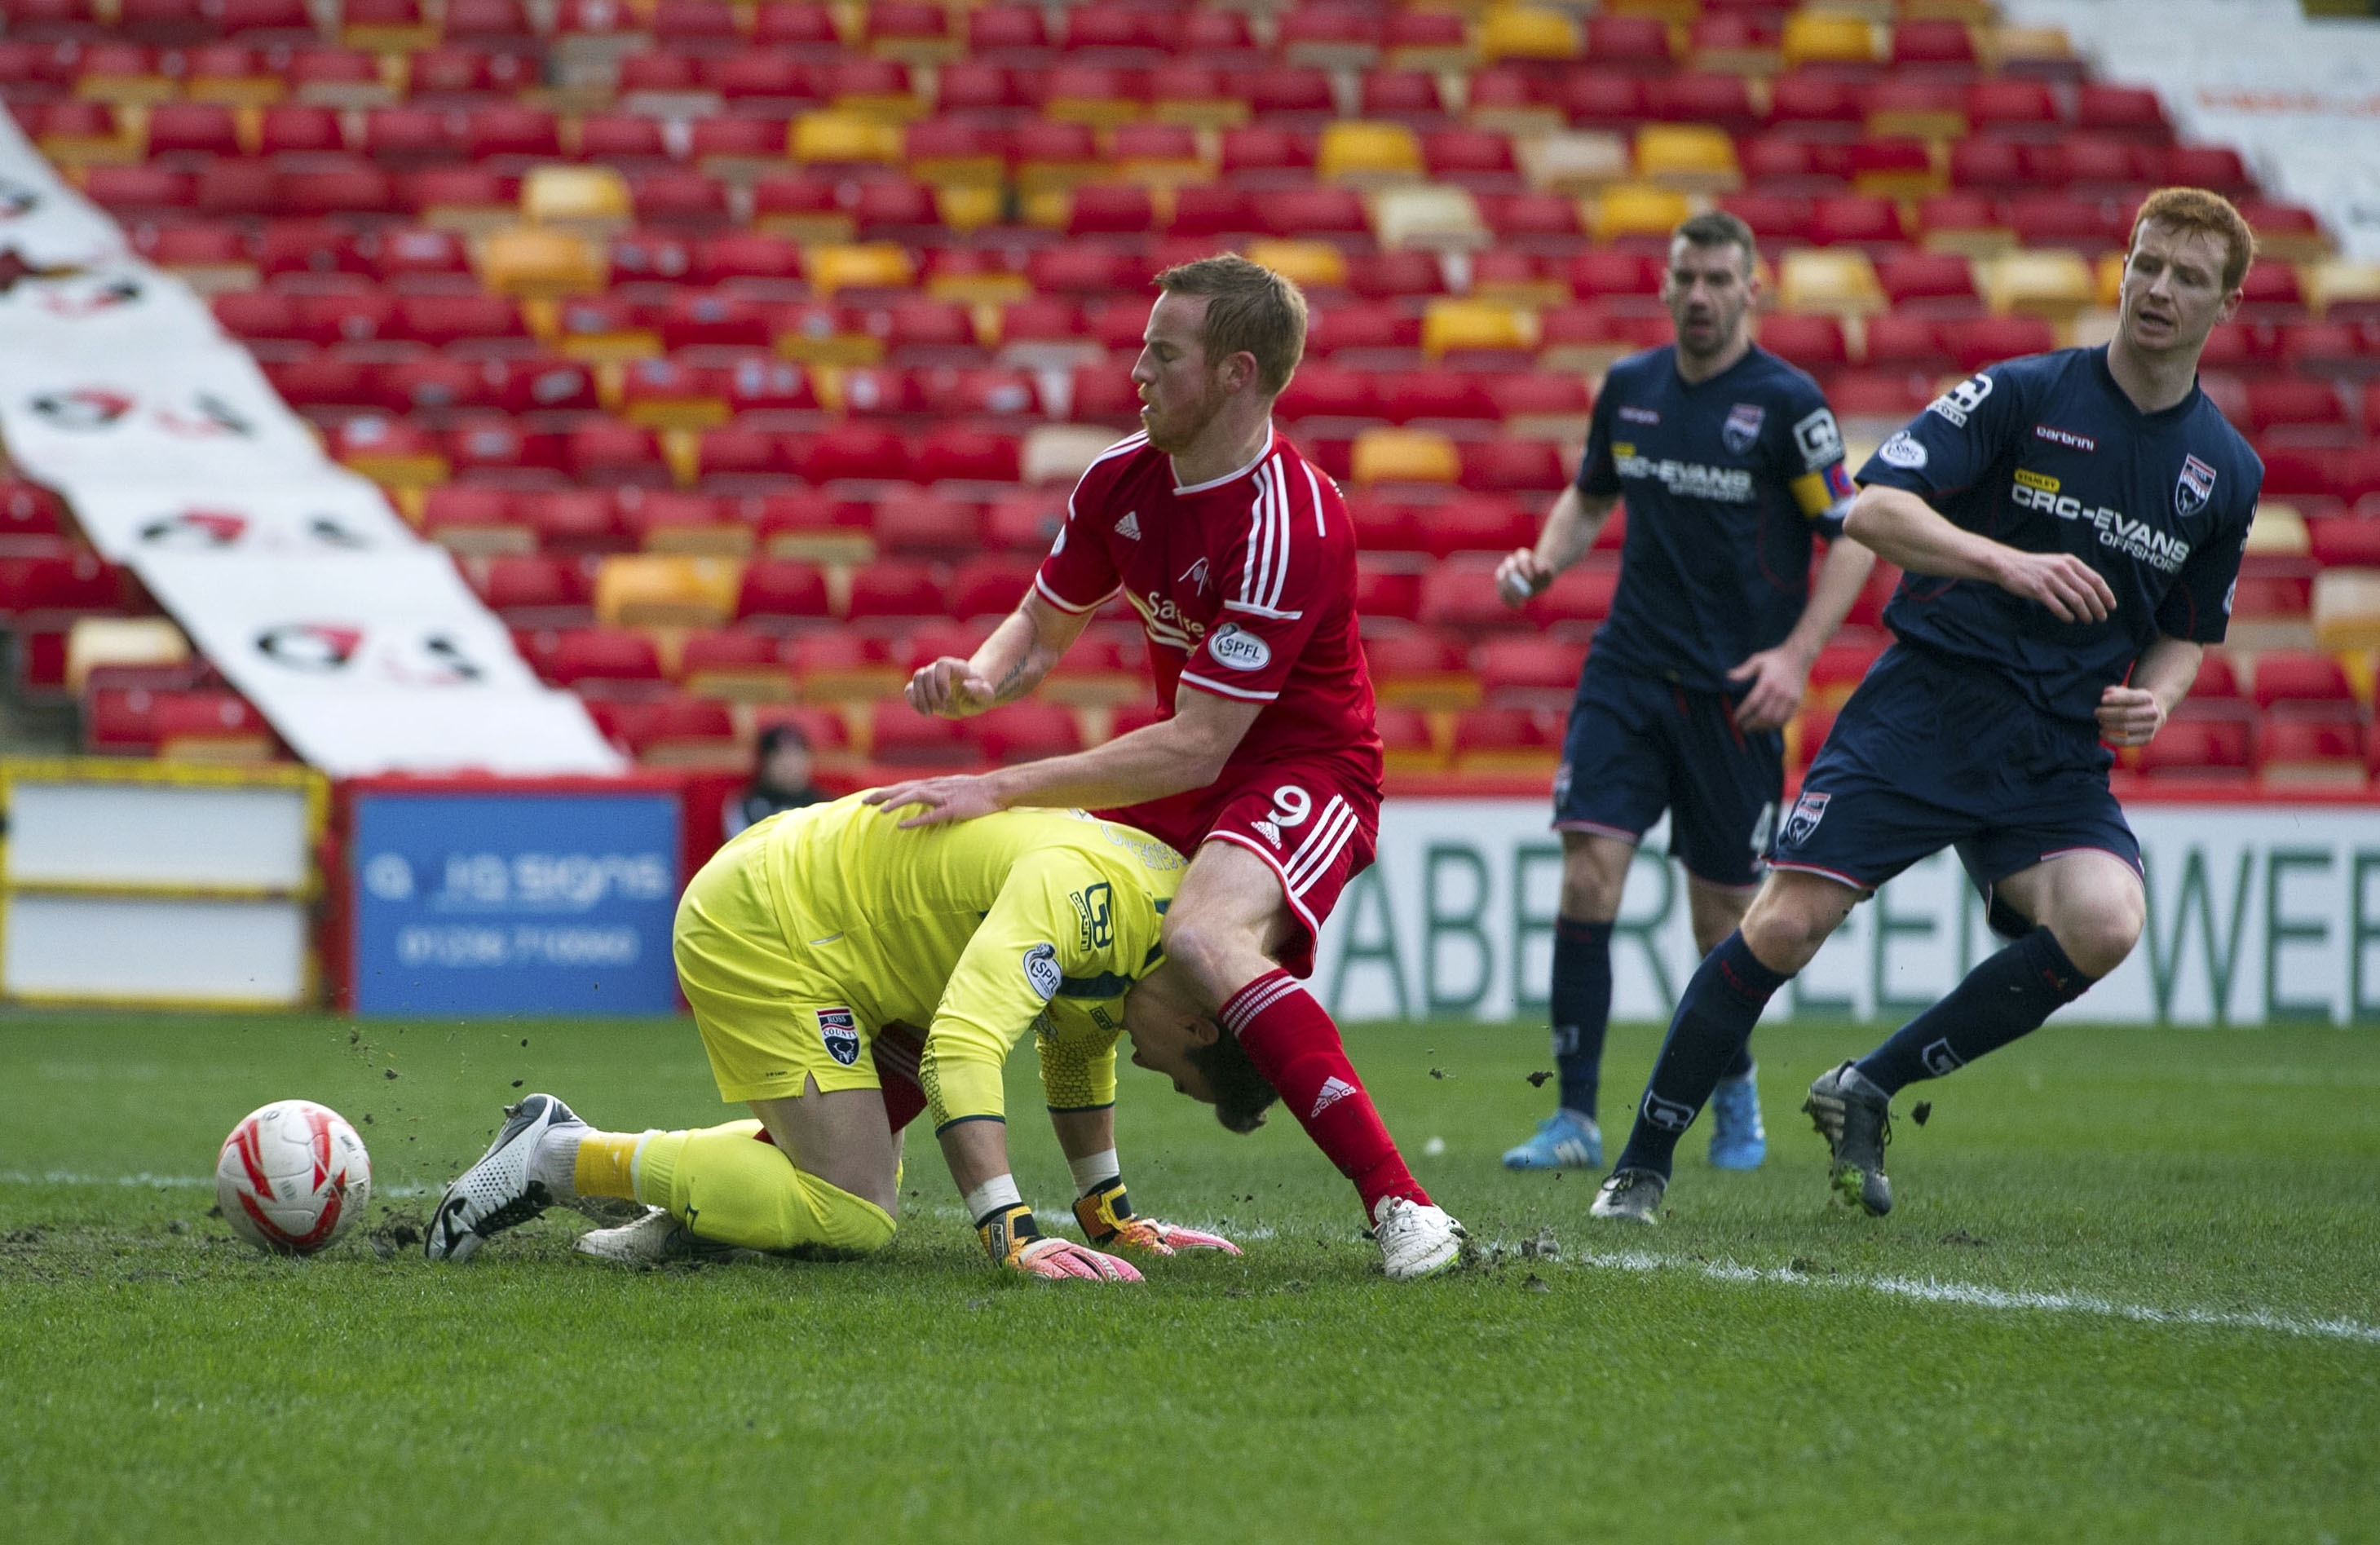 Adam Rooney pounced on an Antonio Reguero error to set Aberdeen on their way to a 4-0 win over the Staggies